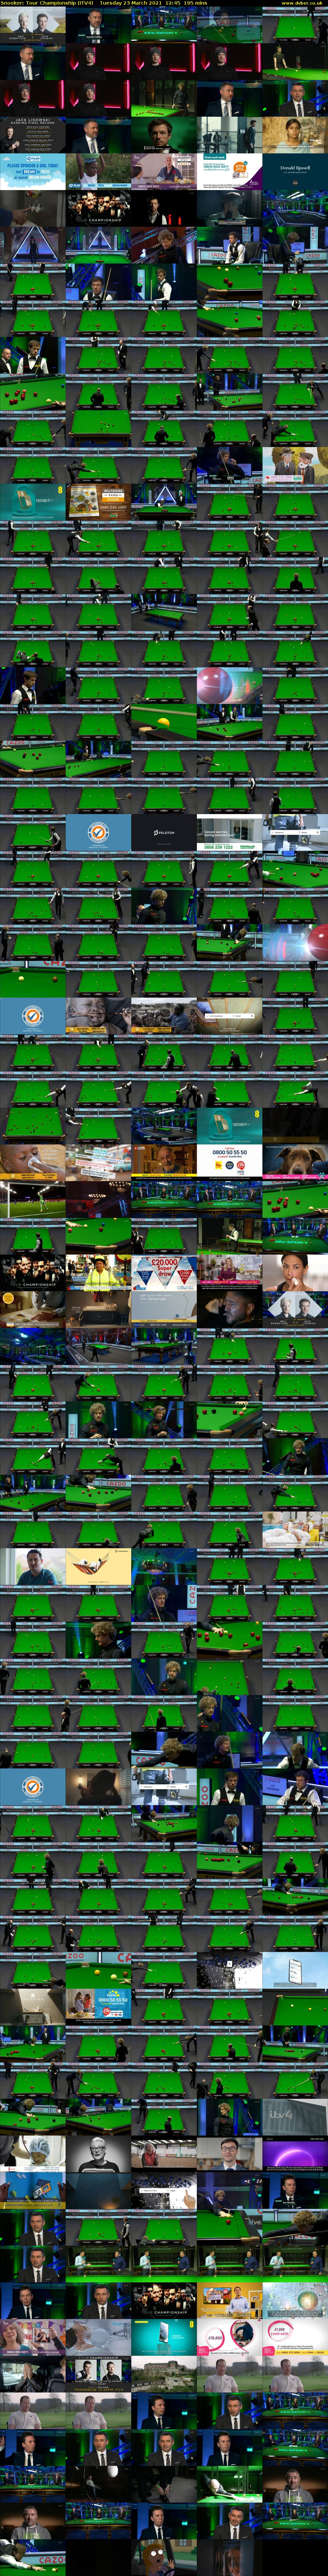 Snooker: Tour Championship (ITV4) Tuesday 23 March 2021 12:45 - 16:00